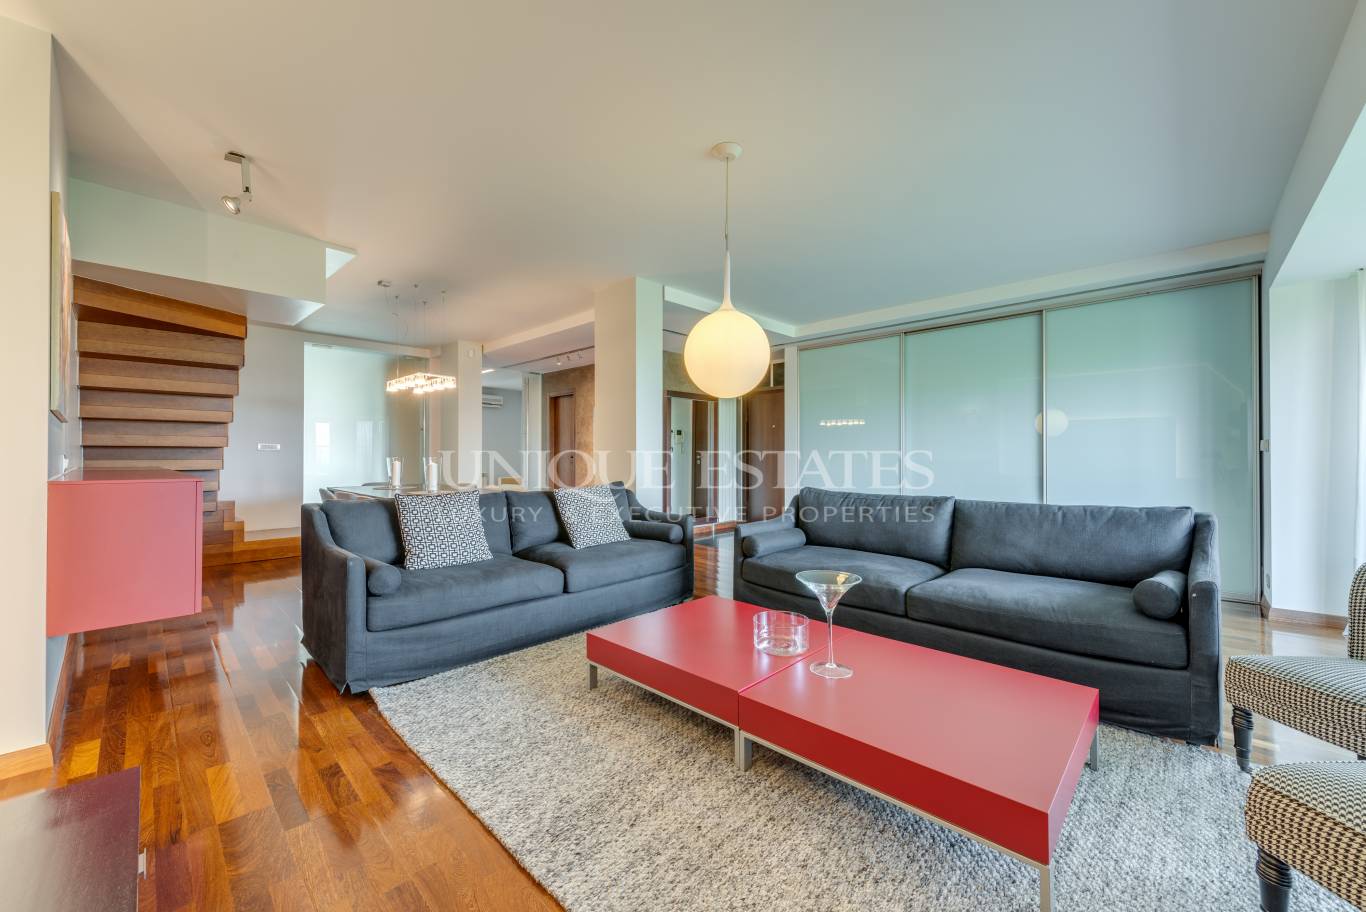 Apartment for rent in Sofia, Ivan Vazov with listing ID: N11745 - image 2